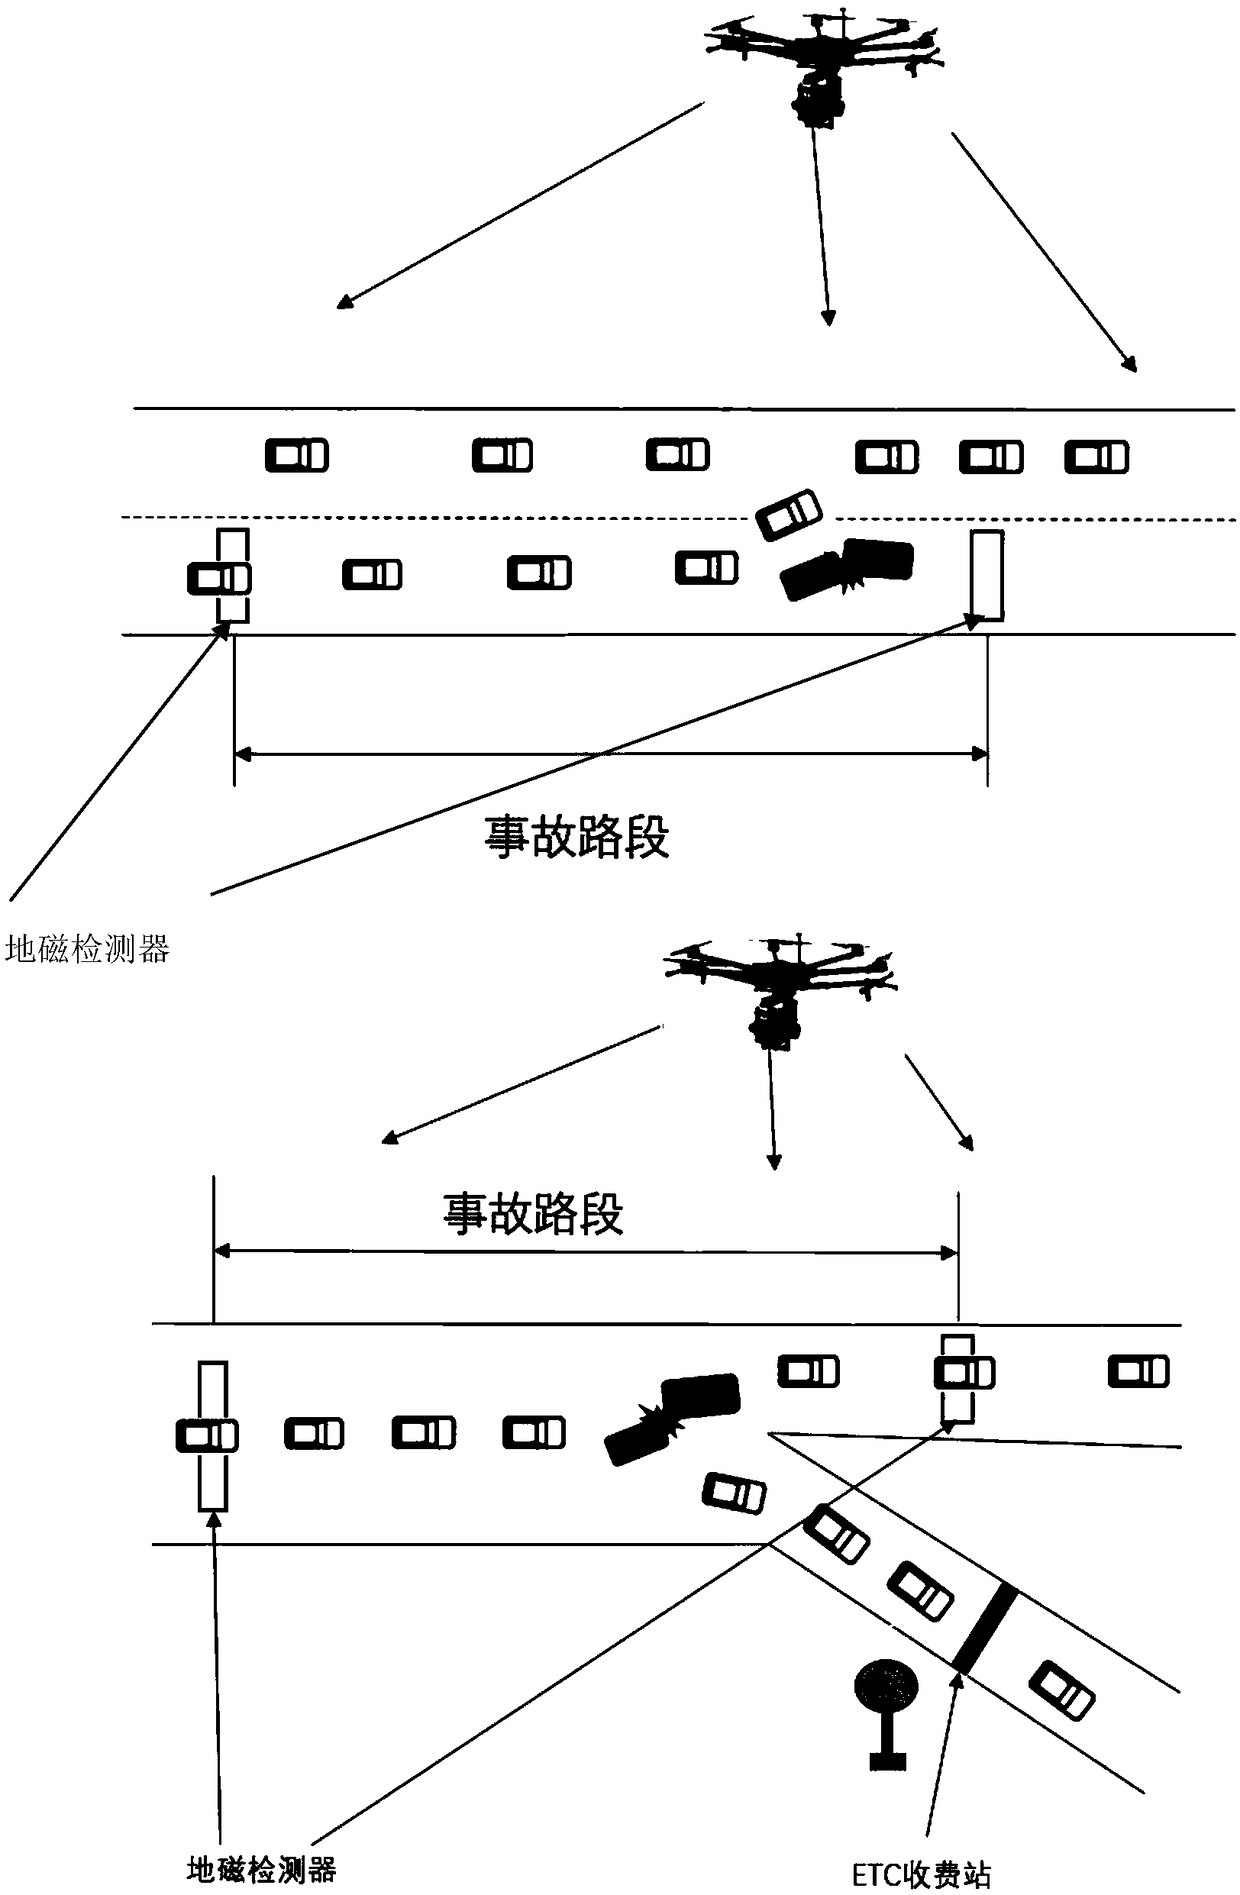 Highway accident monitor method and system based on ground-space collaborative sensing